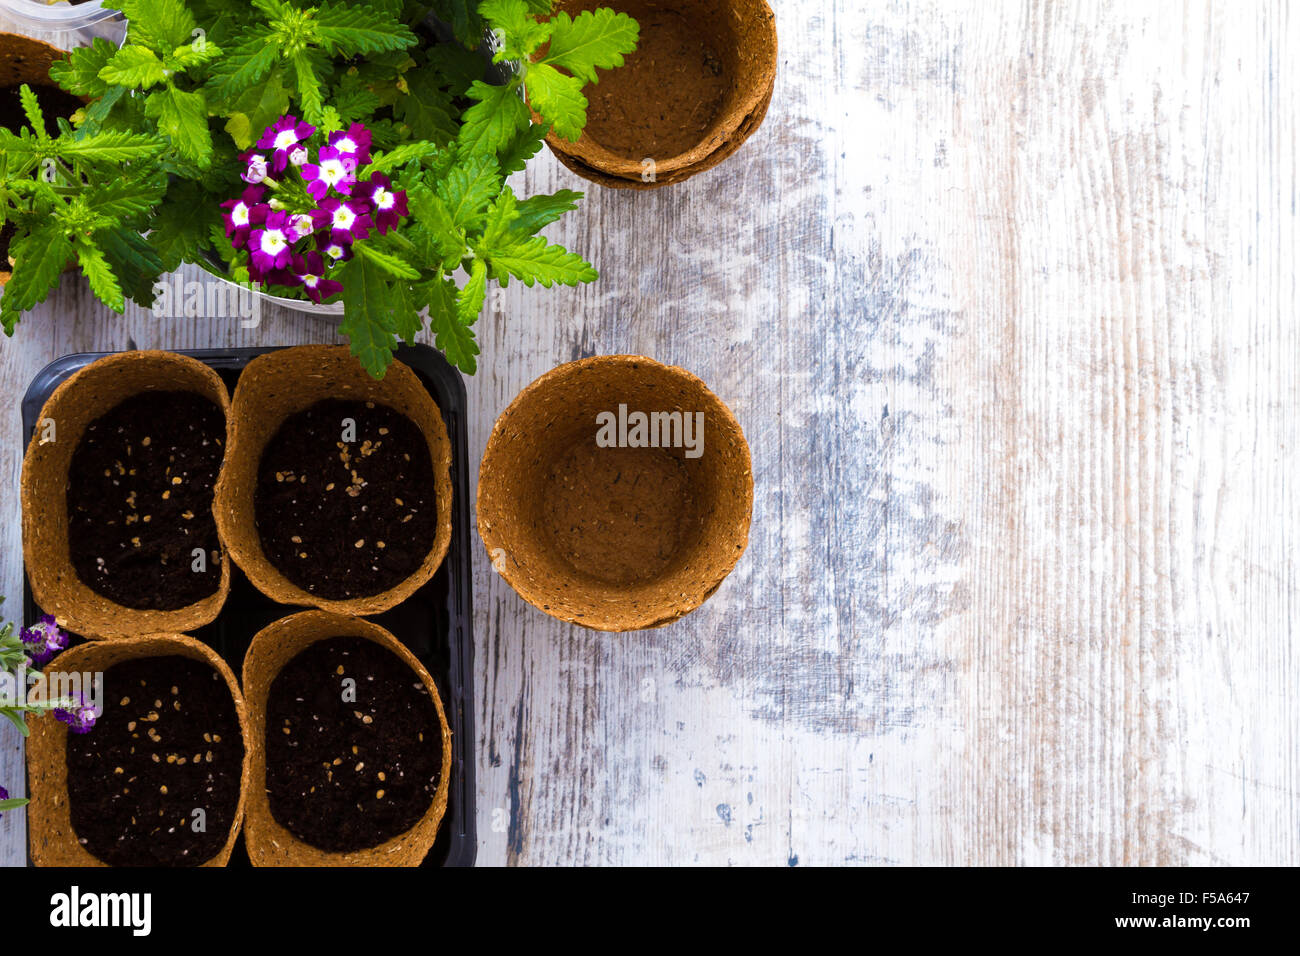 Planting flowers and vegetables at home Stock Photo